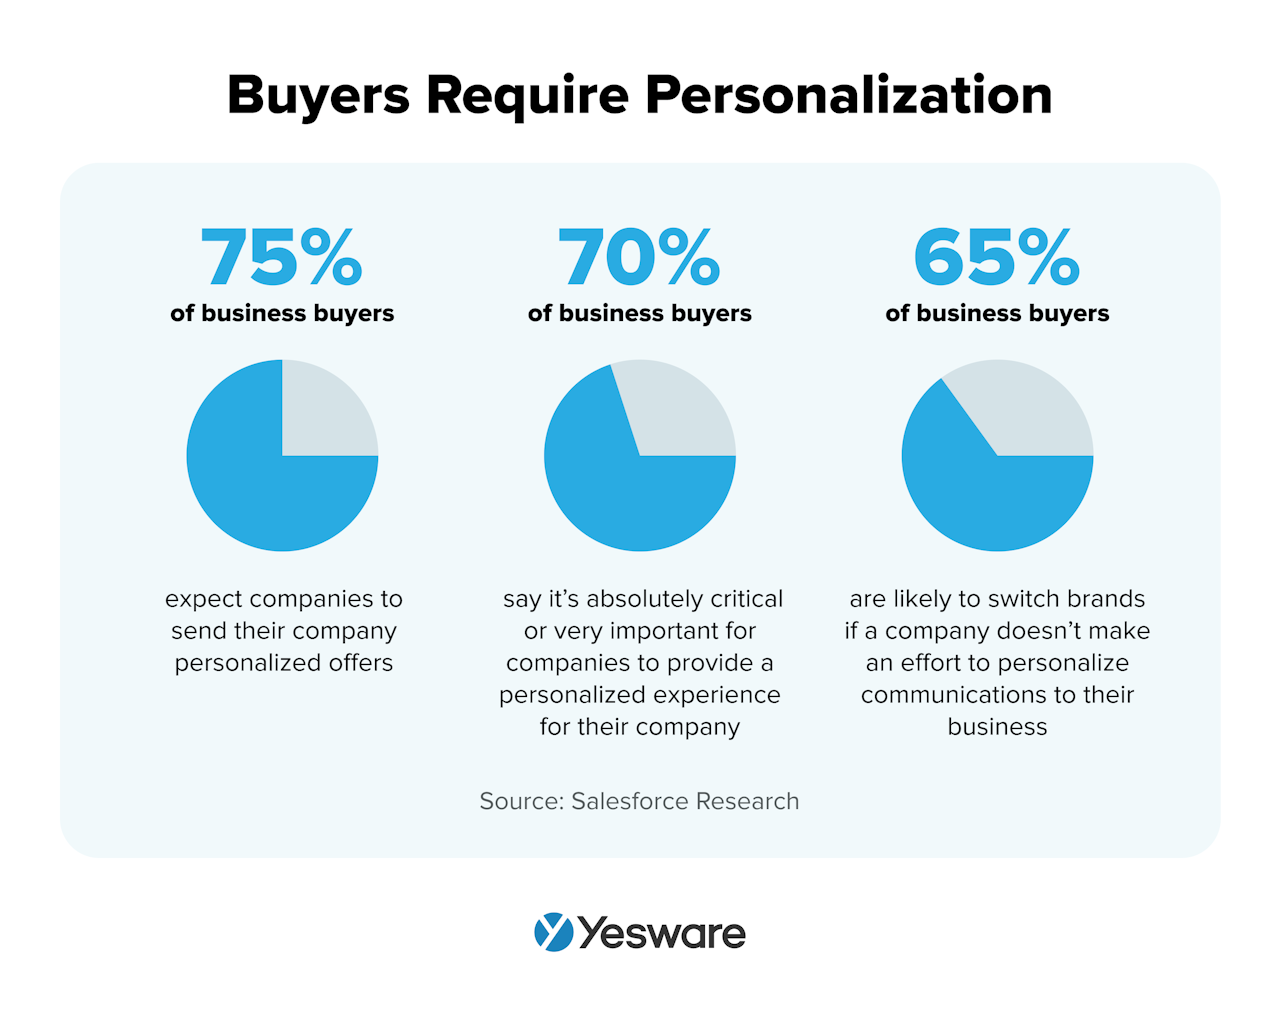 sales emails require personalization